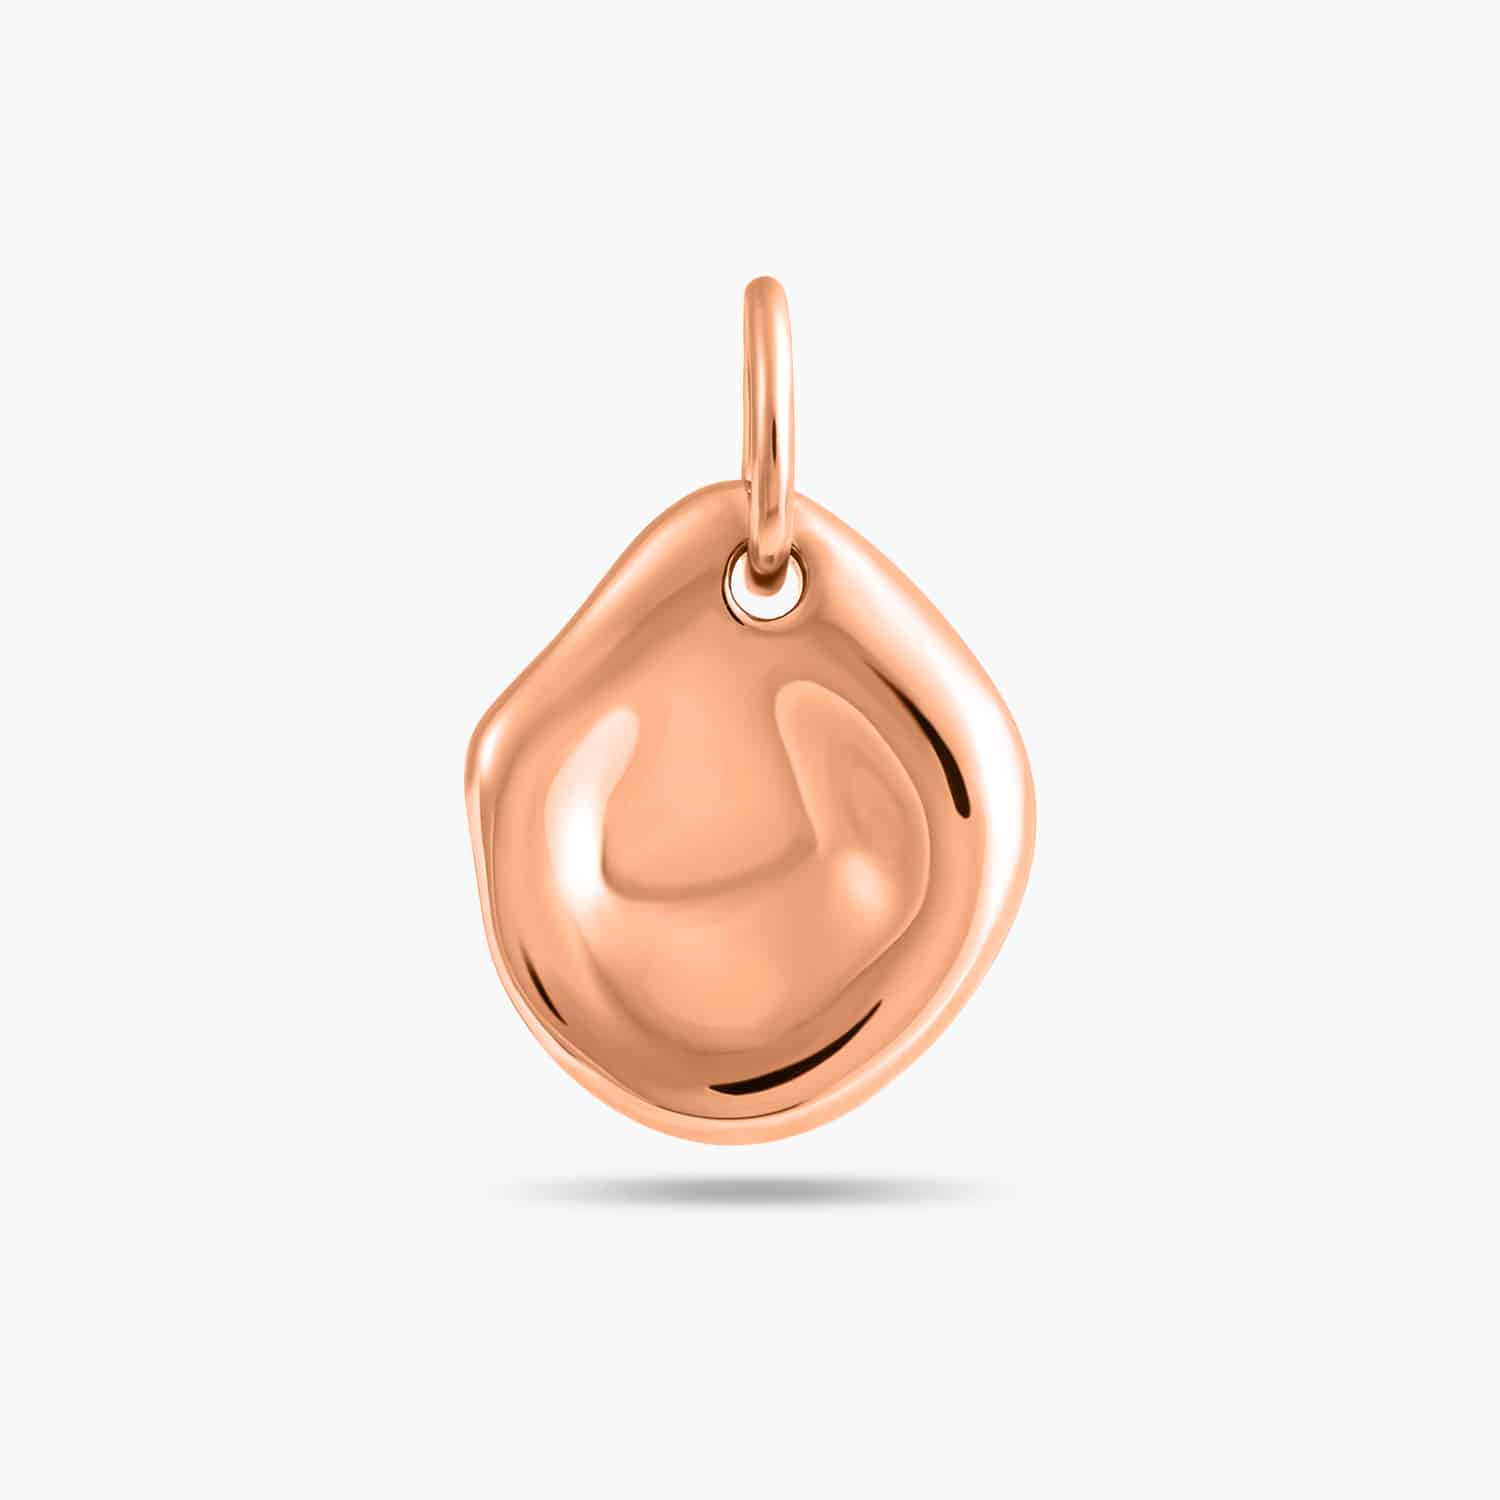 VC Charmes Vintage Oval Pendant made of 925 Sterling Silver Jewellery Plated in Rose Gold